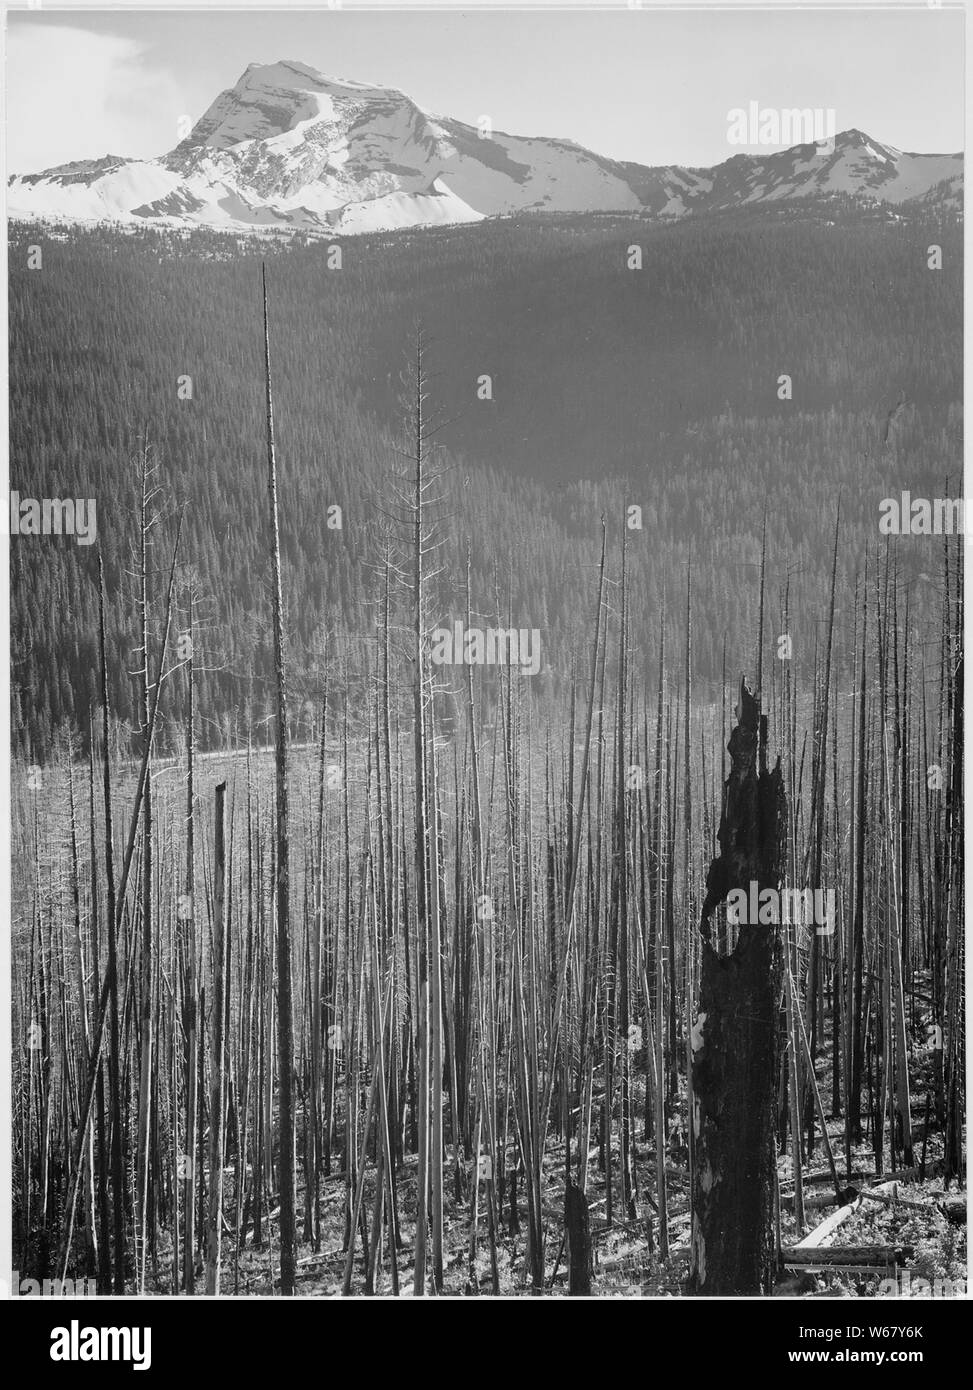 Pine trees, snow covered mountains in background, Burned area, Glacier National Park, Montana. (vertical orientation), 1933 - 1942 Stock Photo